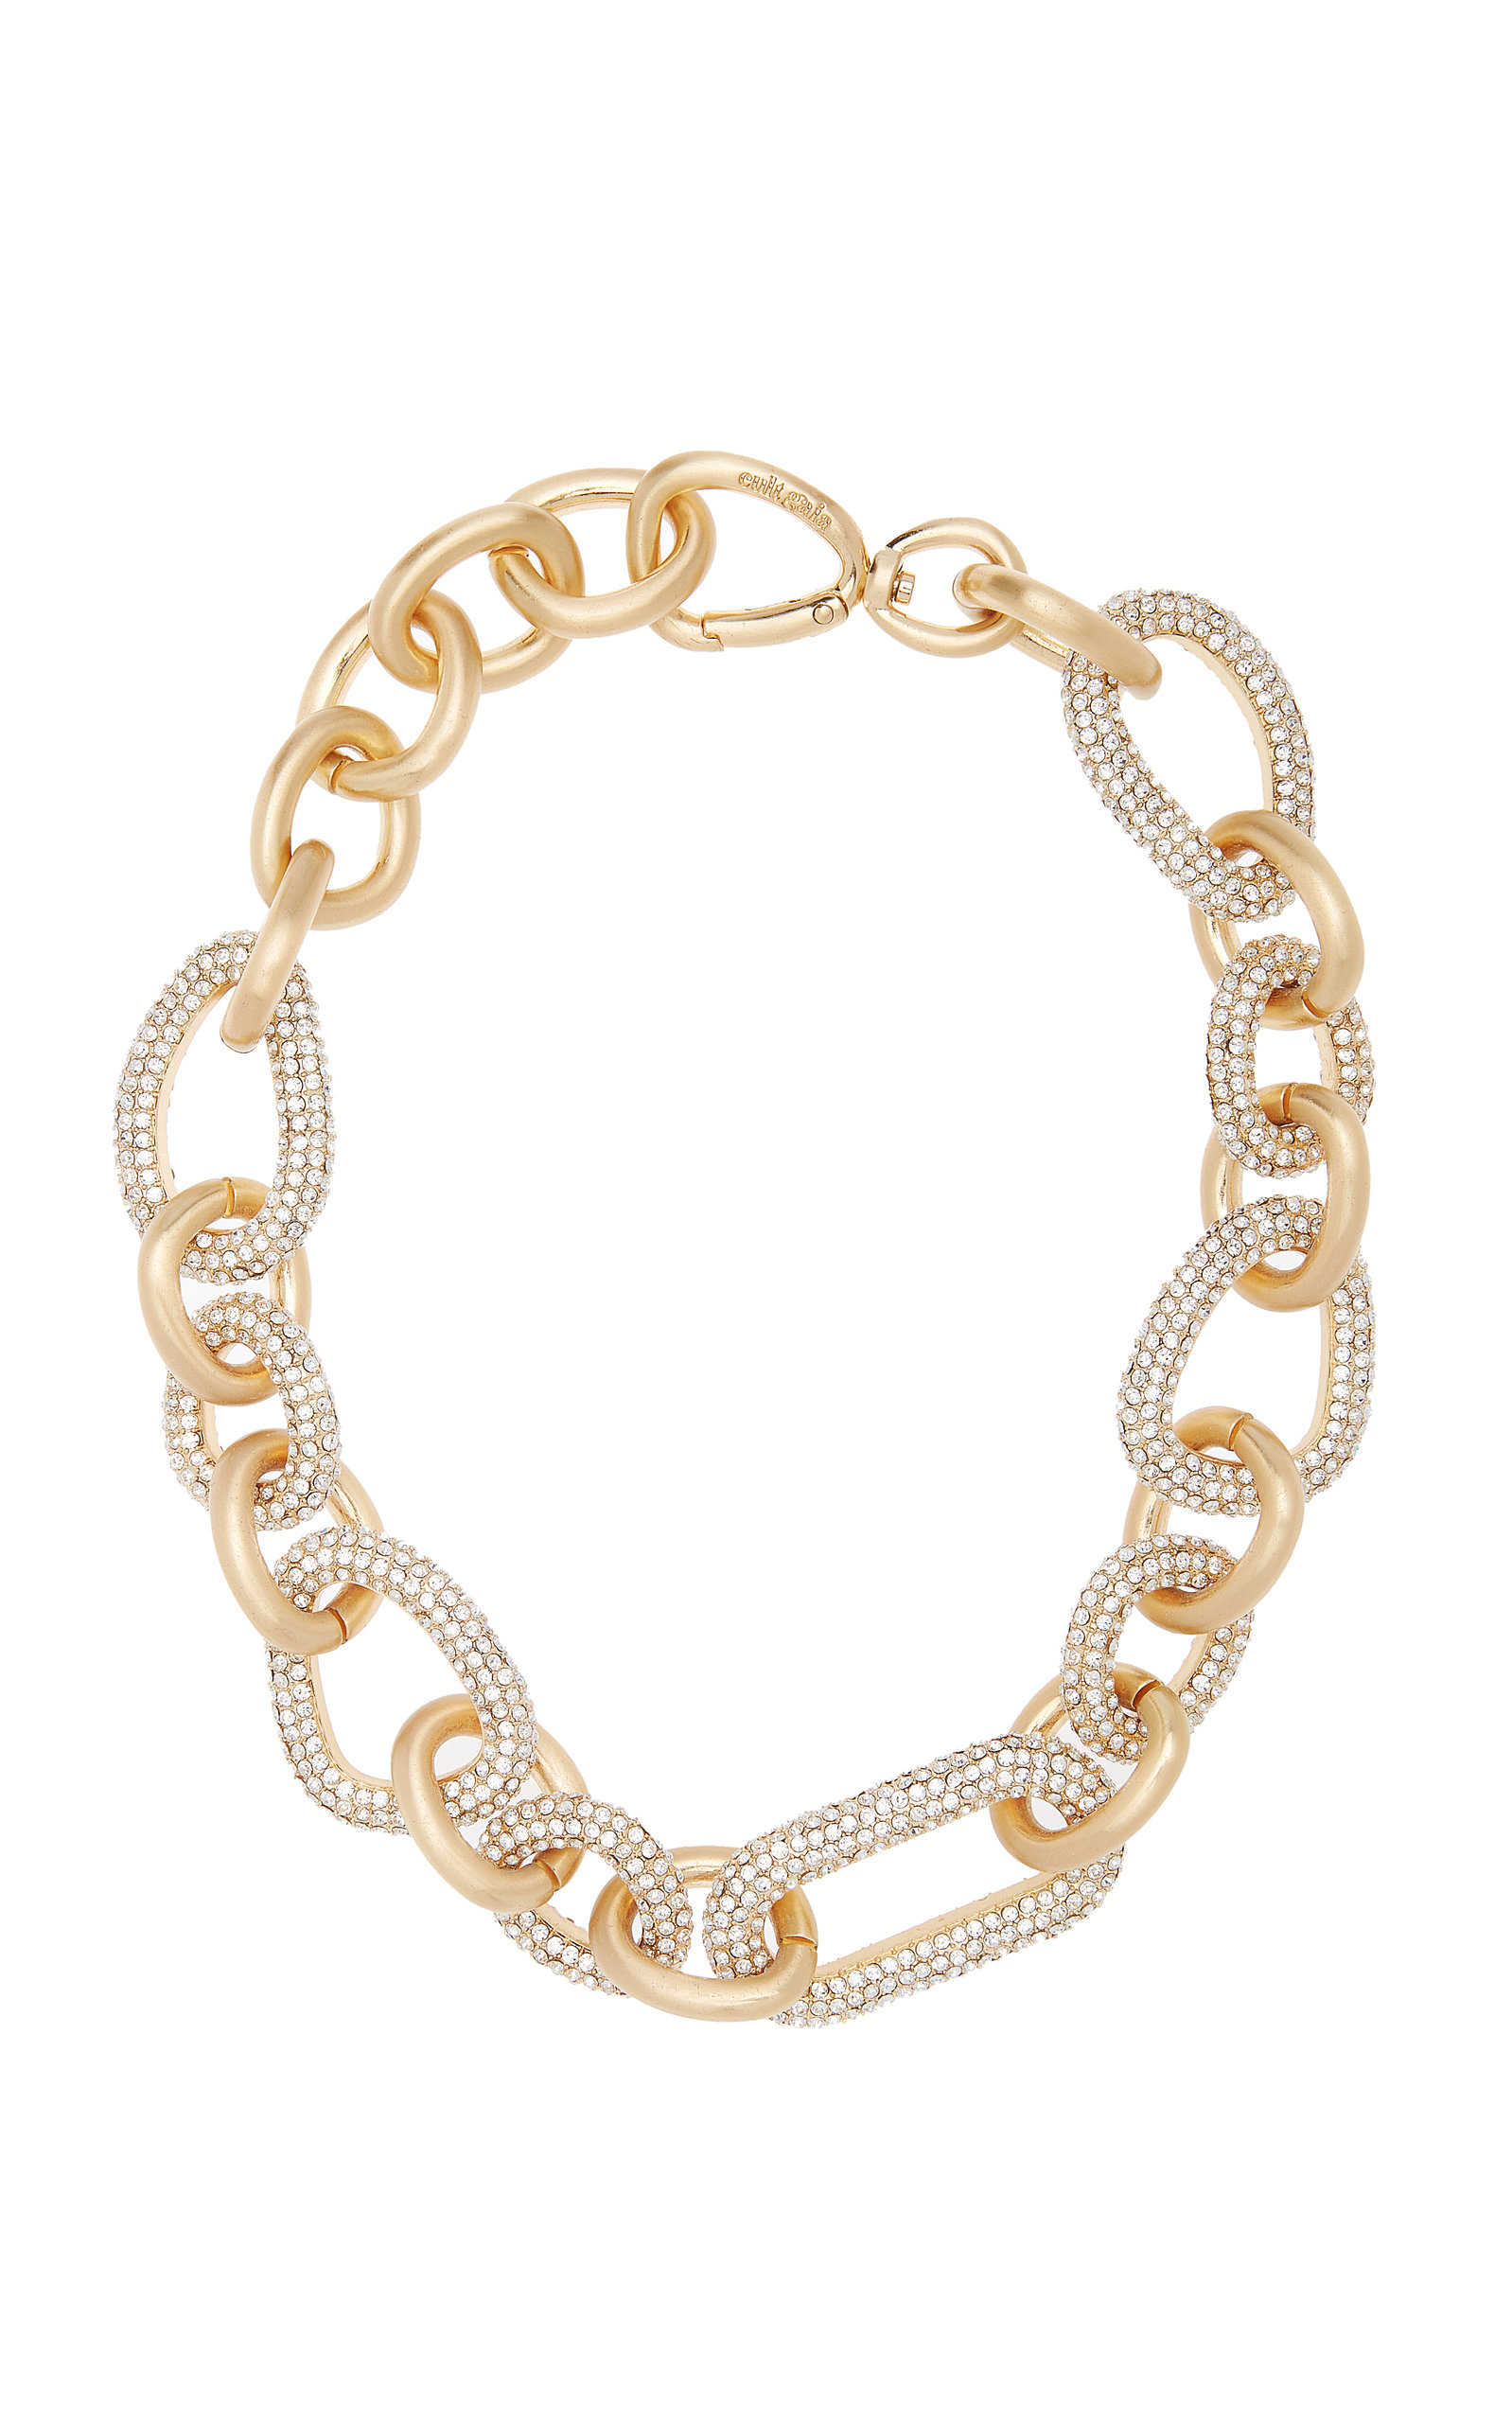 Cult Gaia - Women's Reyes Gold-Tone Necklace - Gold - OS - Moda Operandi - Gifts For Her